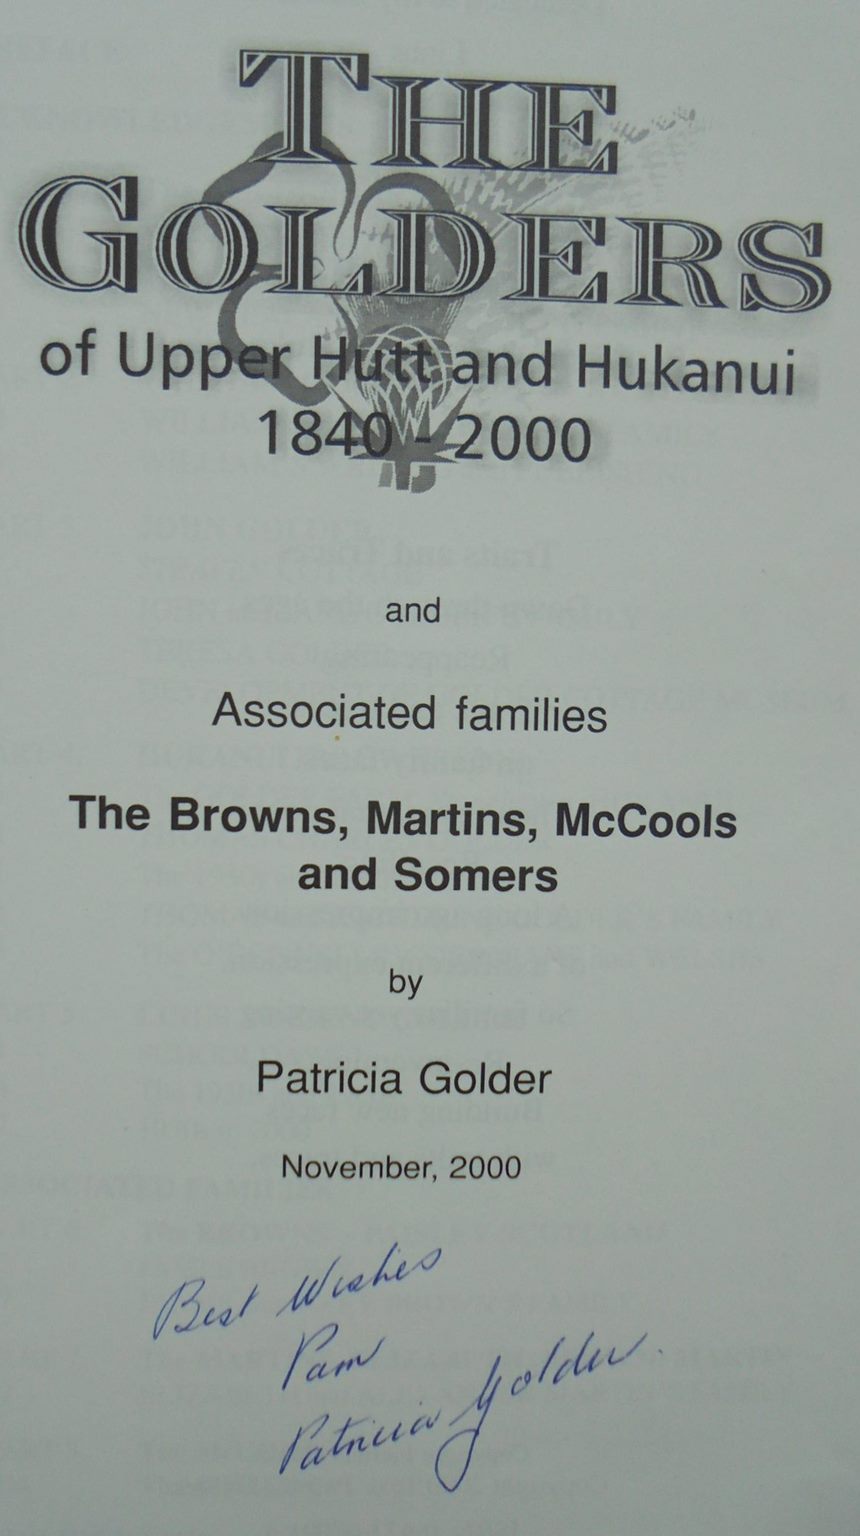 The Golders of Upper Hutt and Hukanui, 1840-2000, and associated families, the Browns, Martins, McCools and Somers by Patricia Golder. SIGNED BY AUTHOR, VERY SCARCE.